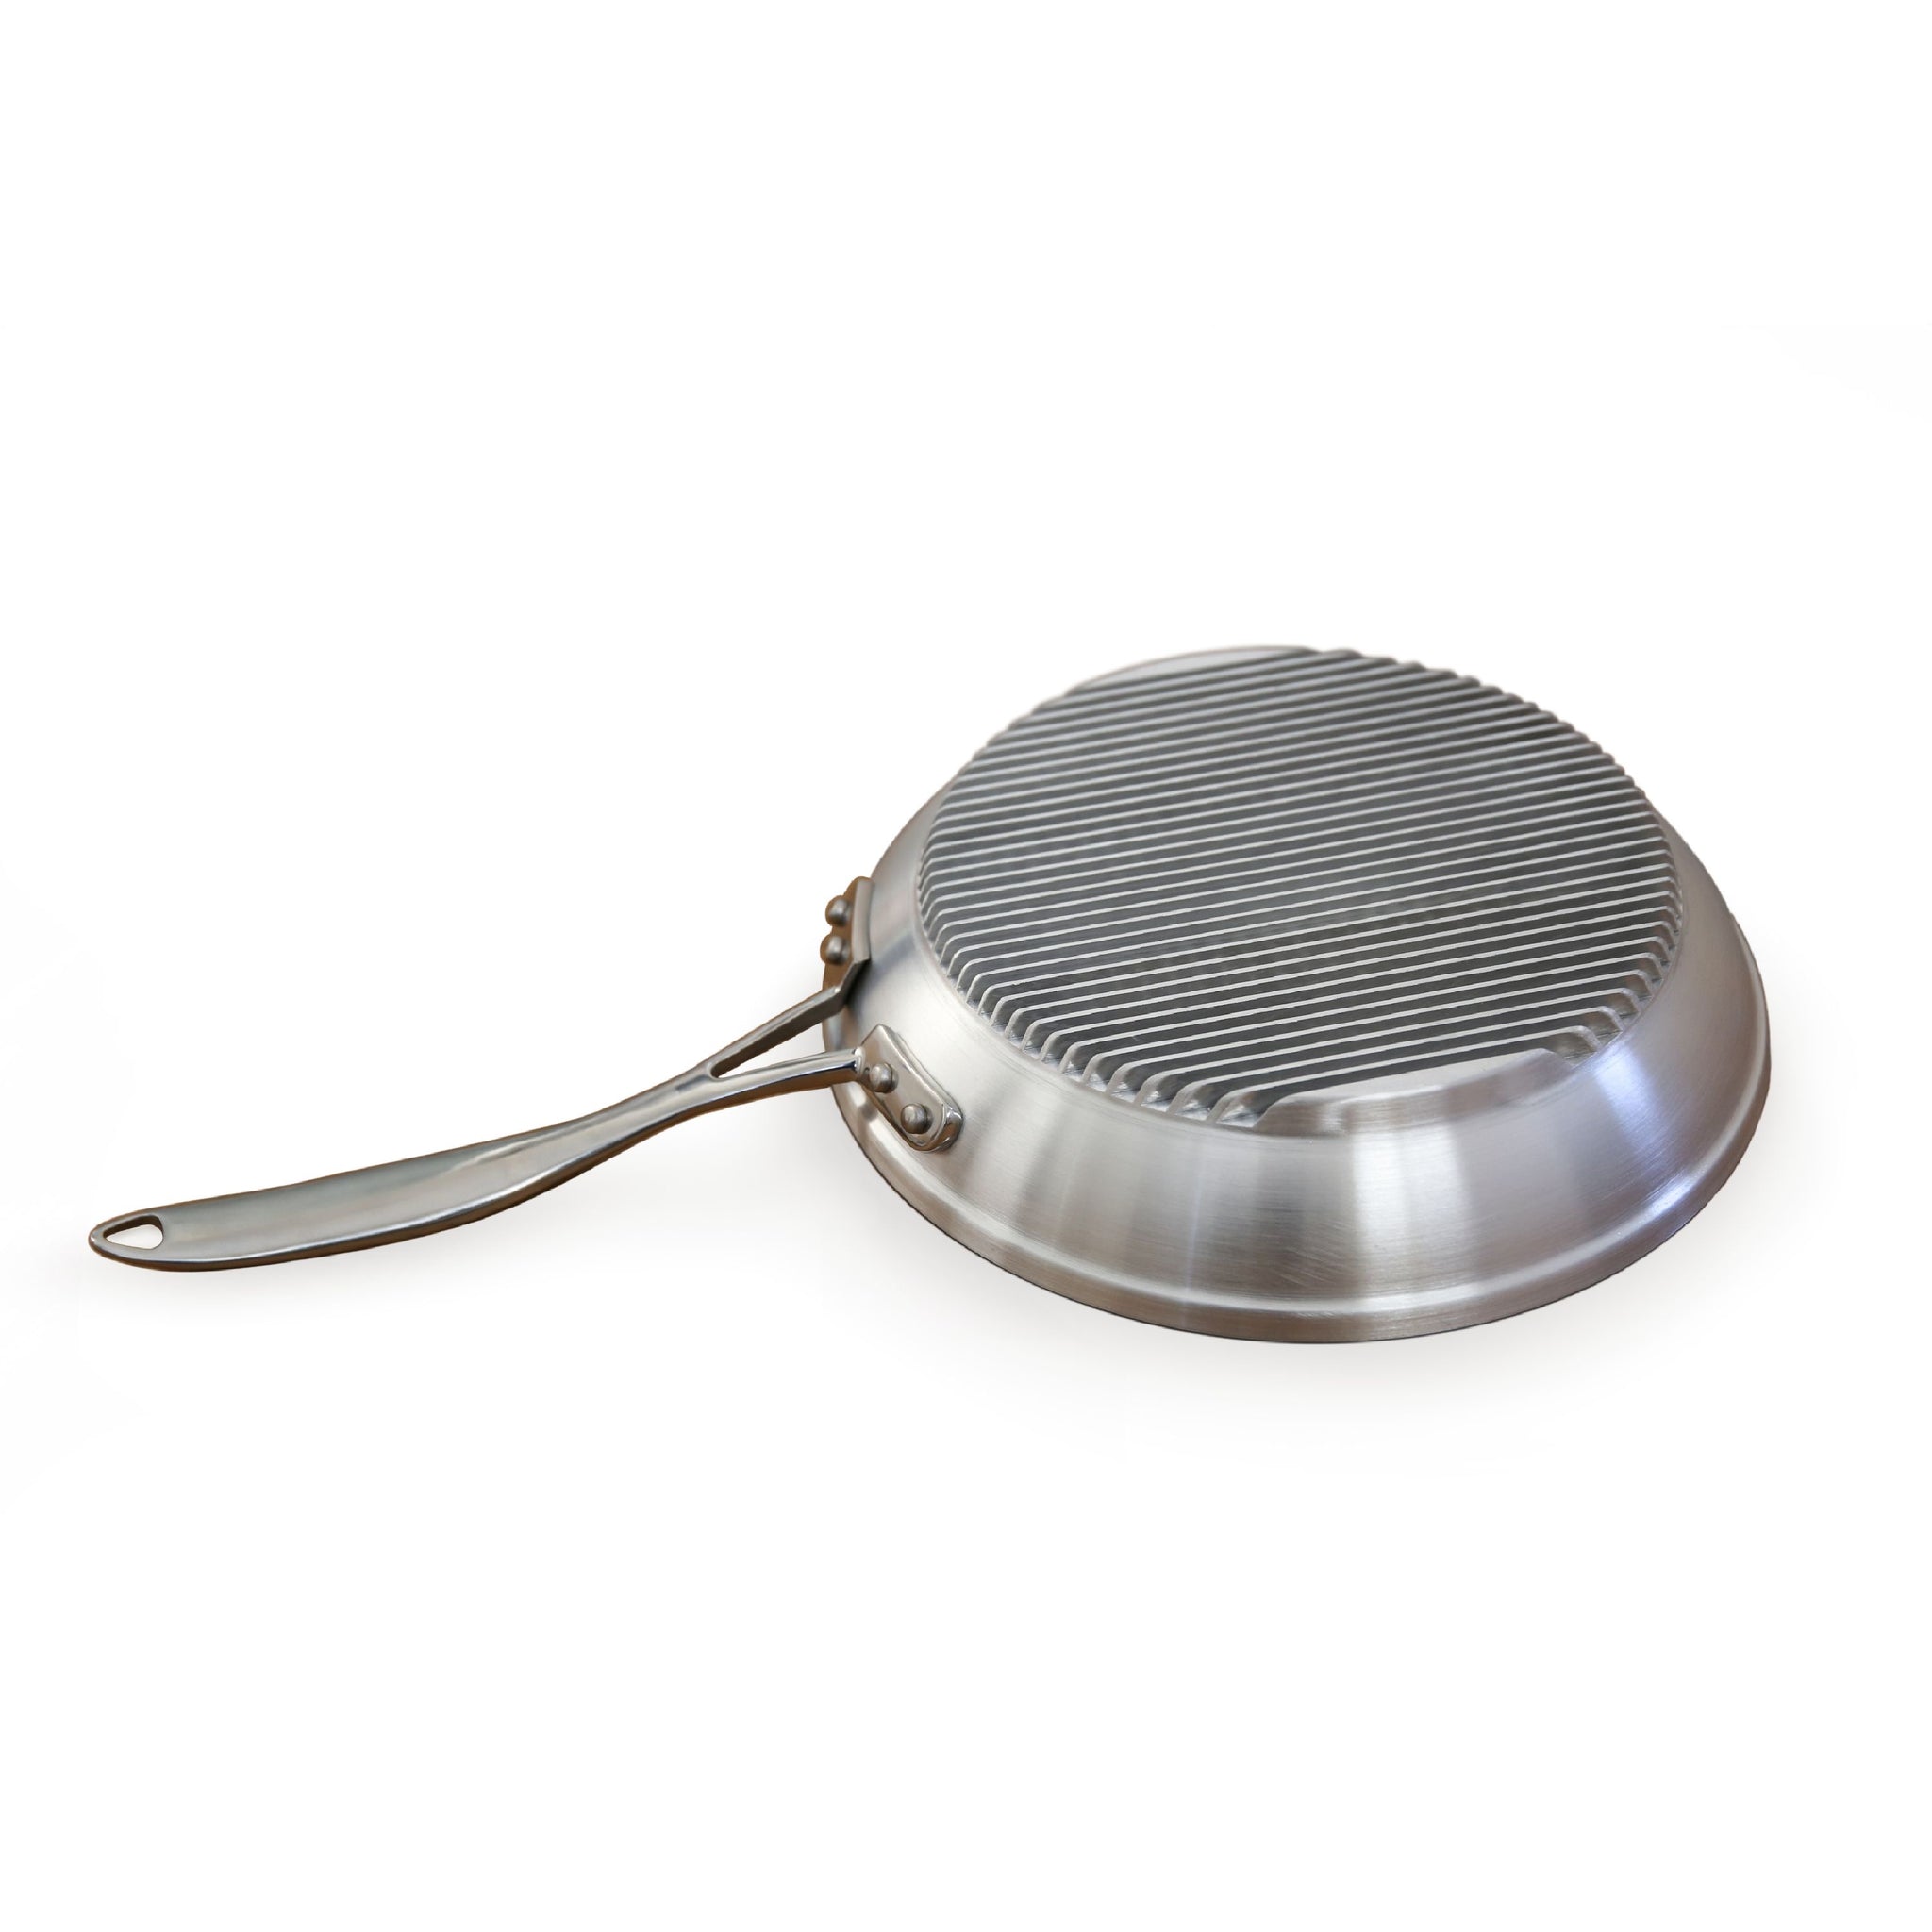  Cooking Pan, Fast Heating Speed Frying Pan for